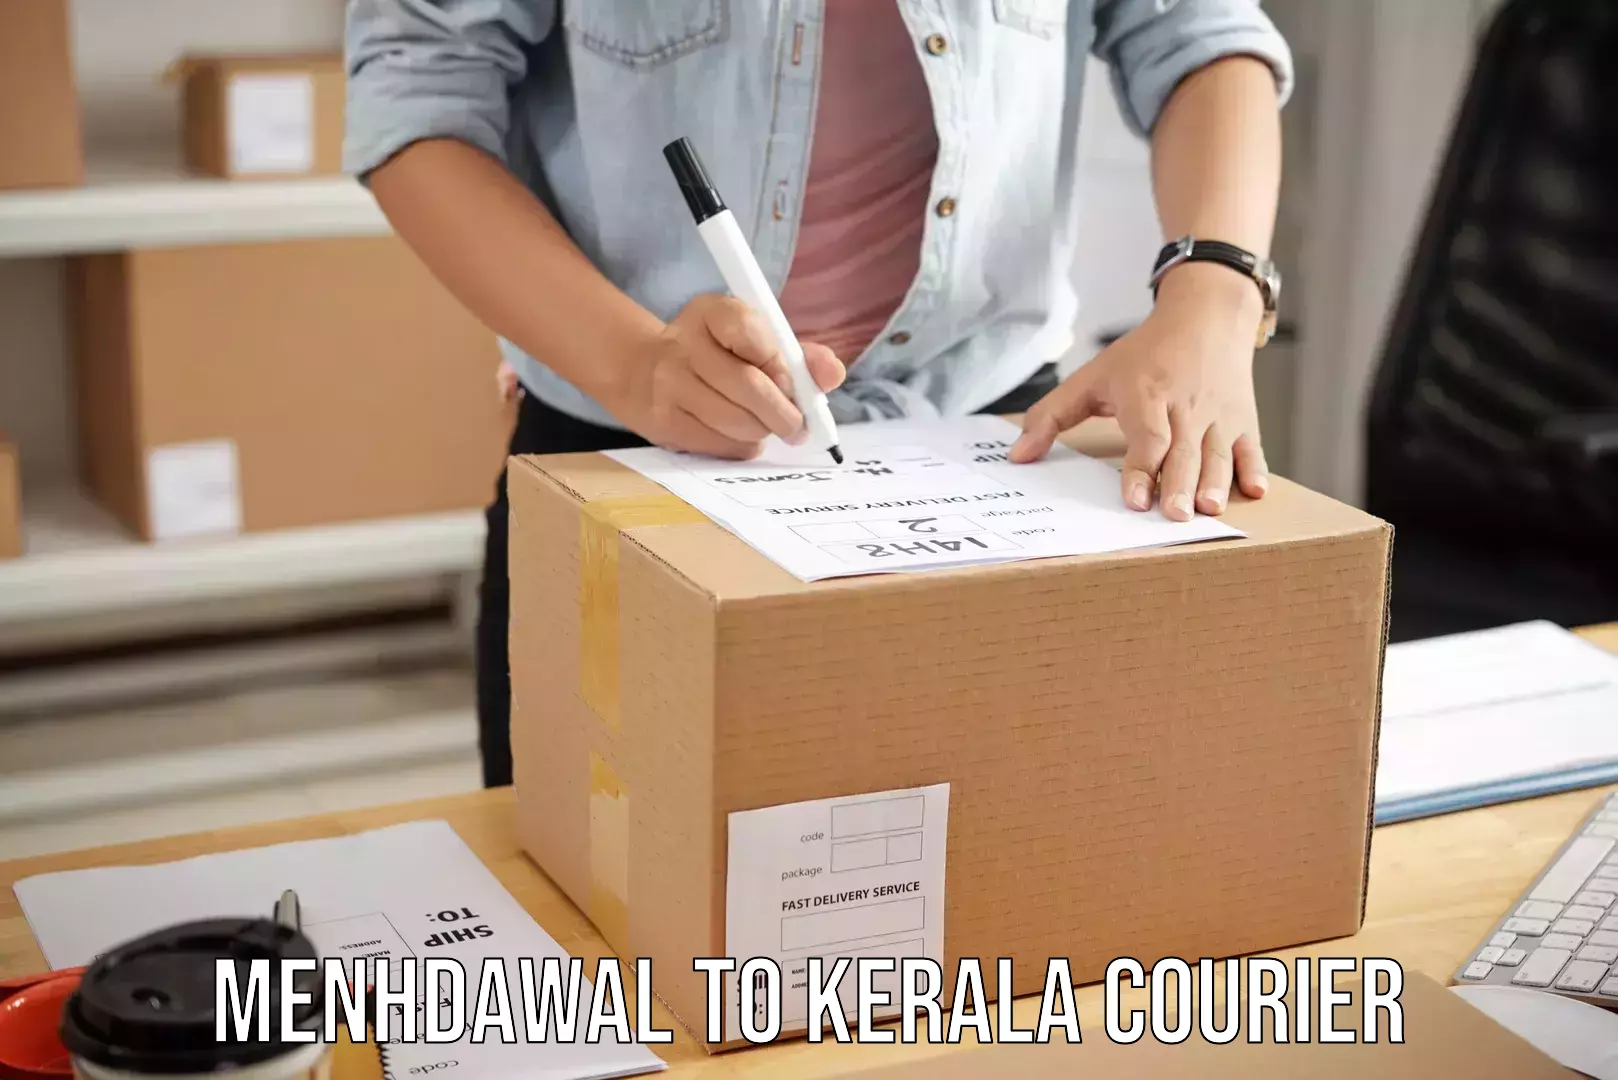 Business luggage transport in Menhdawal to Kerala